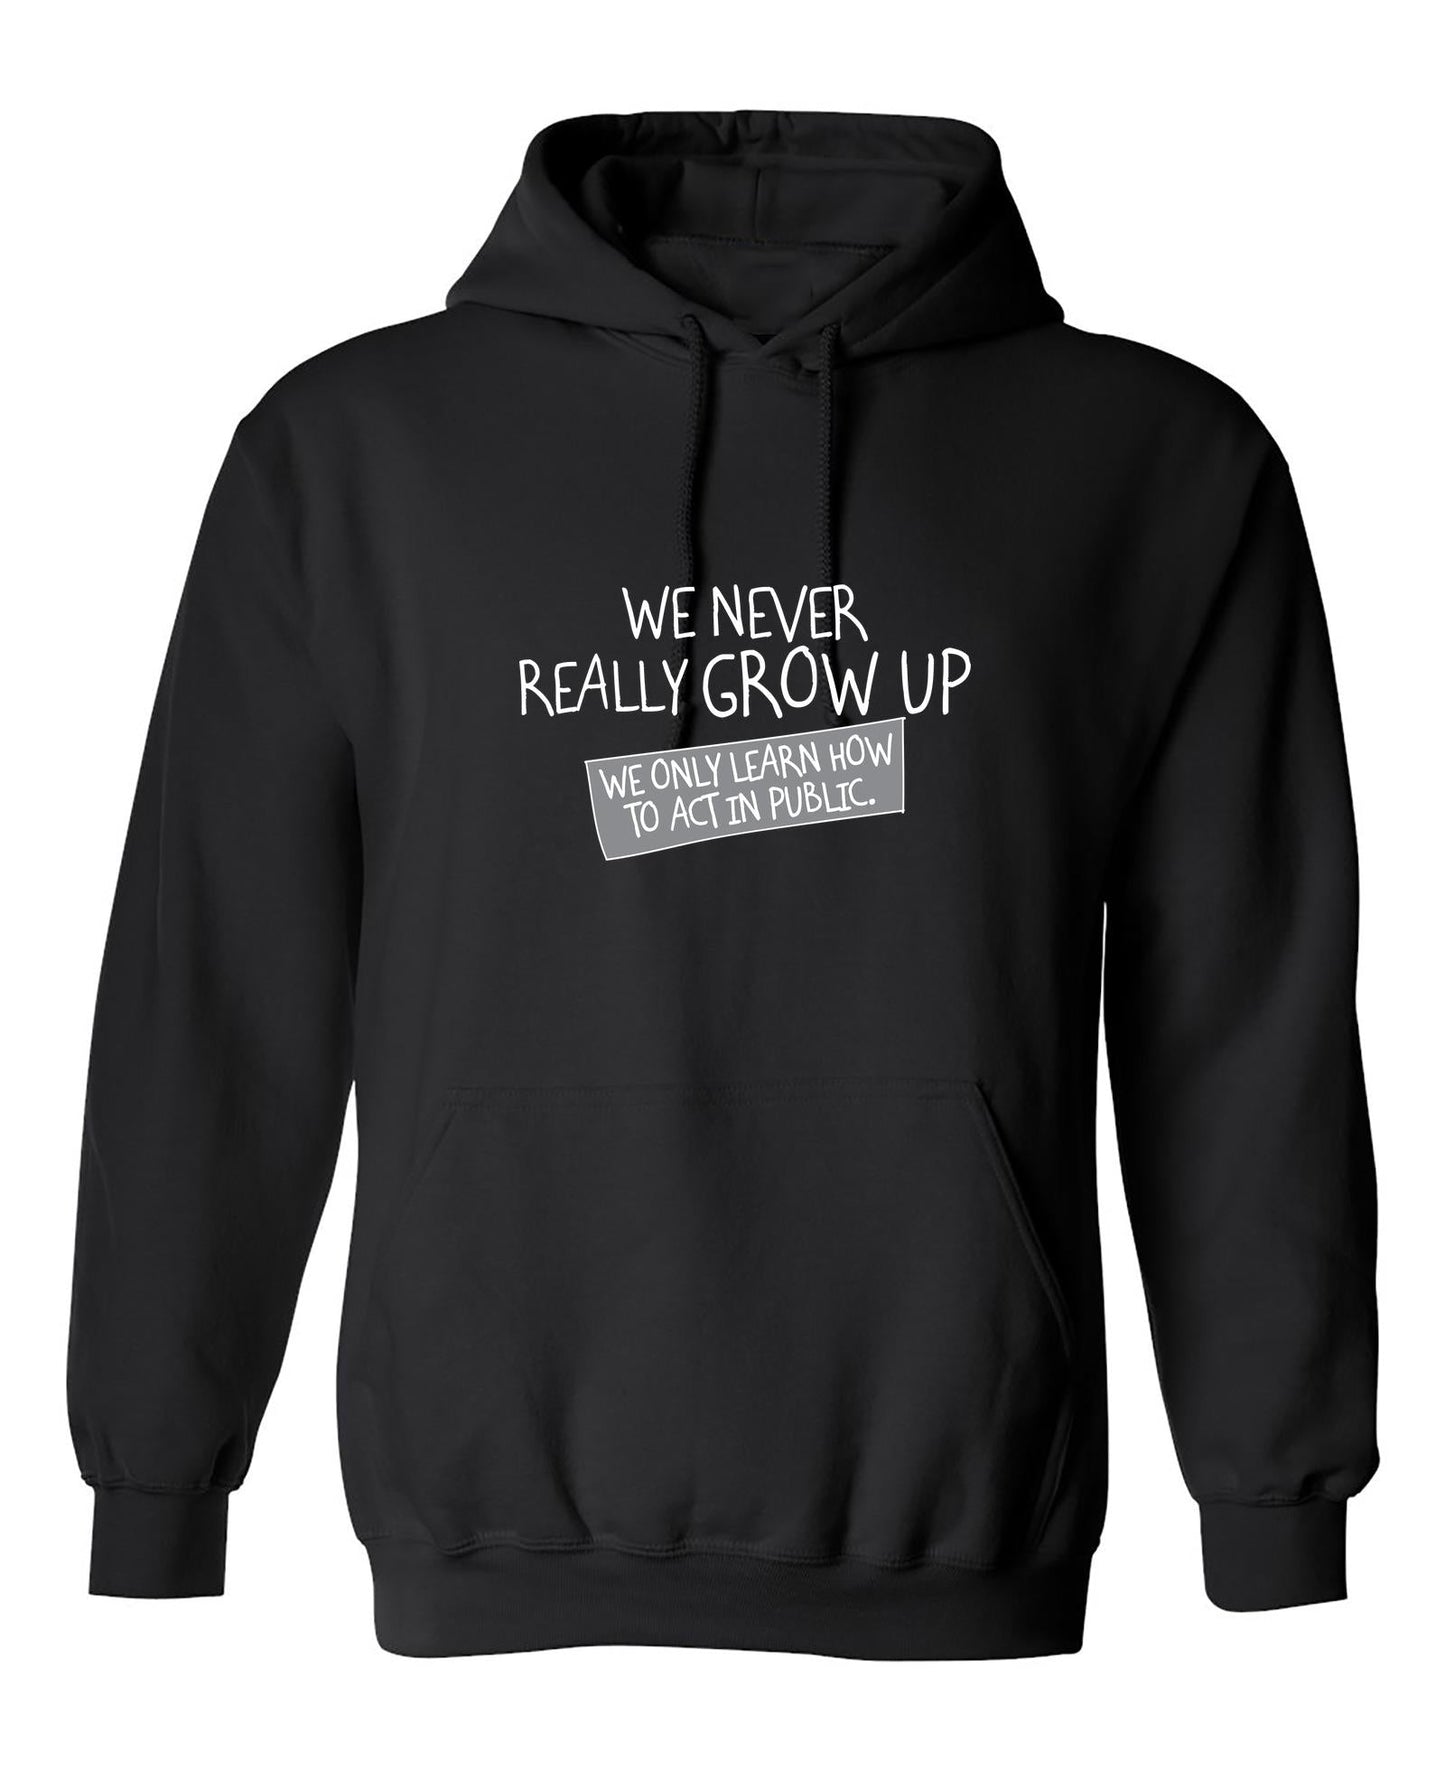 Funny T-Shirts design "We Never Really Grow Up We Only Learn How To Act In Public"